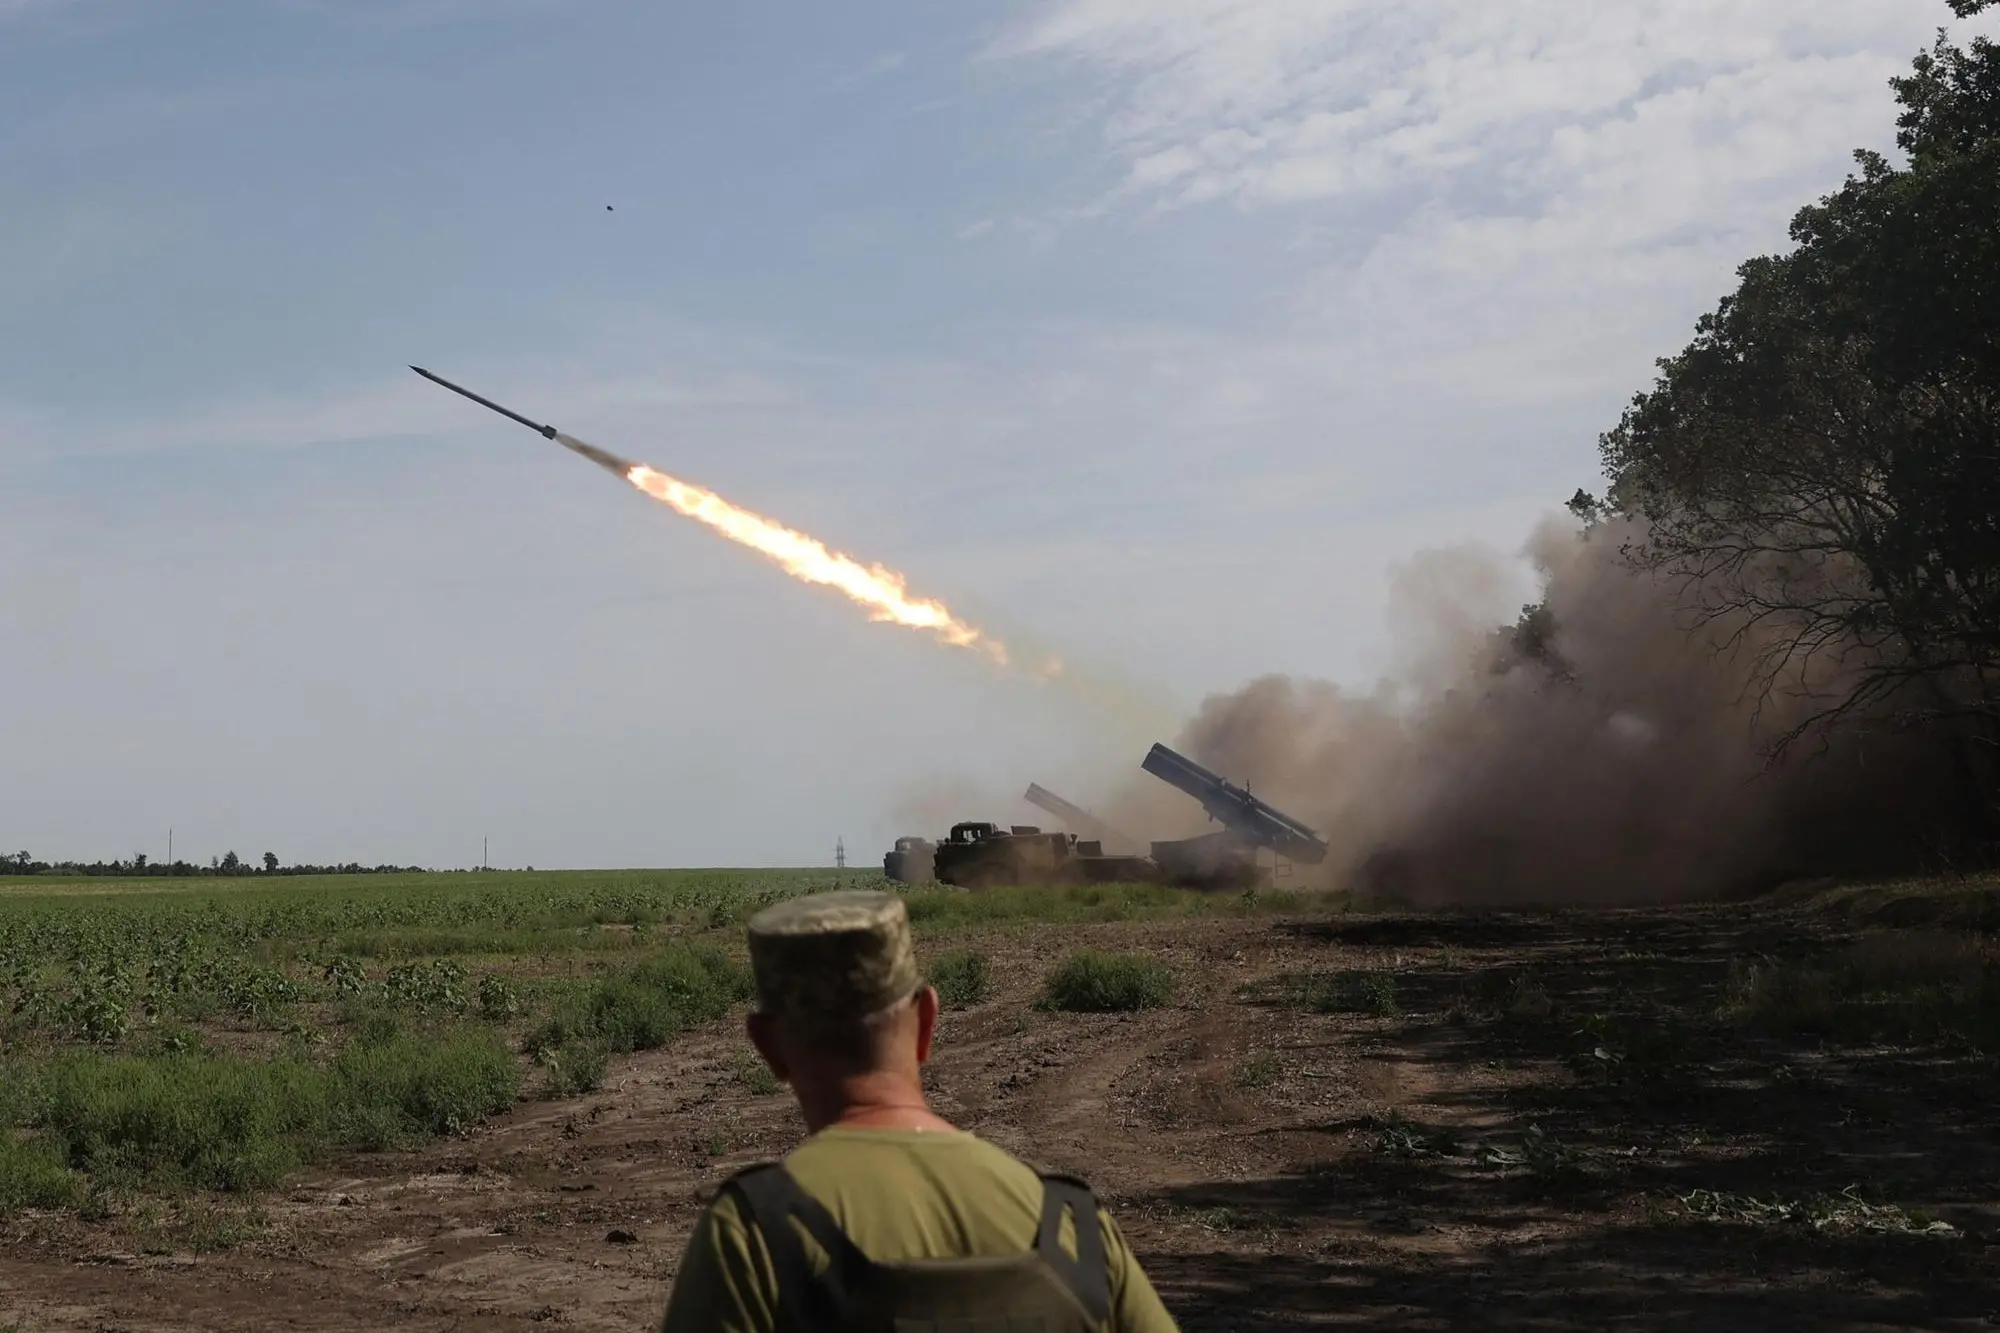 Ukrainian artillery unit fires with a BM-27 Uragan, a self-propelled 220 mm multiple rocket launcher, at a position near a frontline in Donetsk region on August 27, 2022, amid the Russian invasion of Ukraine. (Photo by Anatolii Stepanov / AFP)